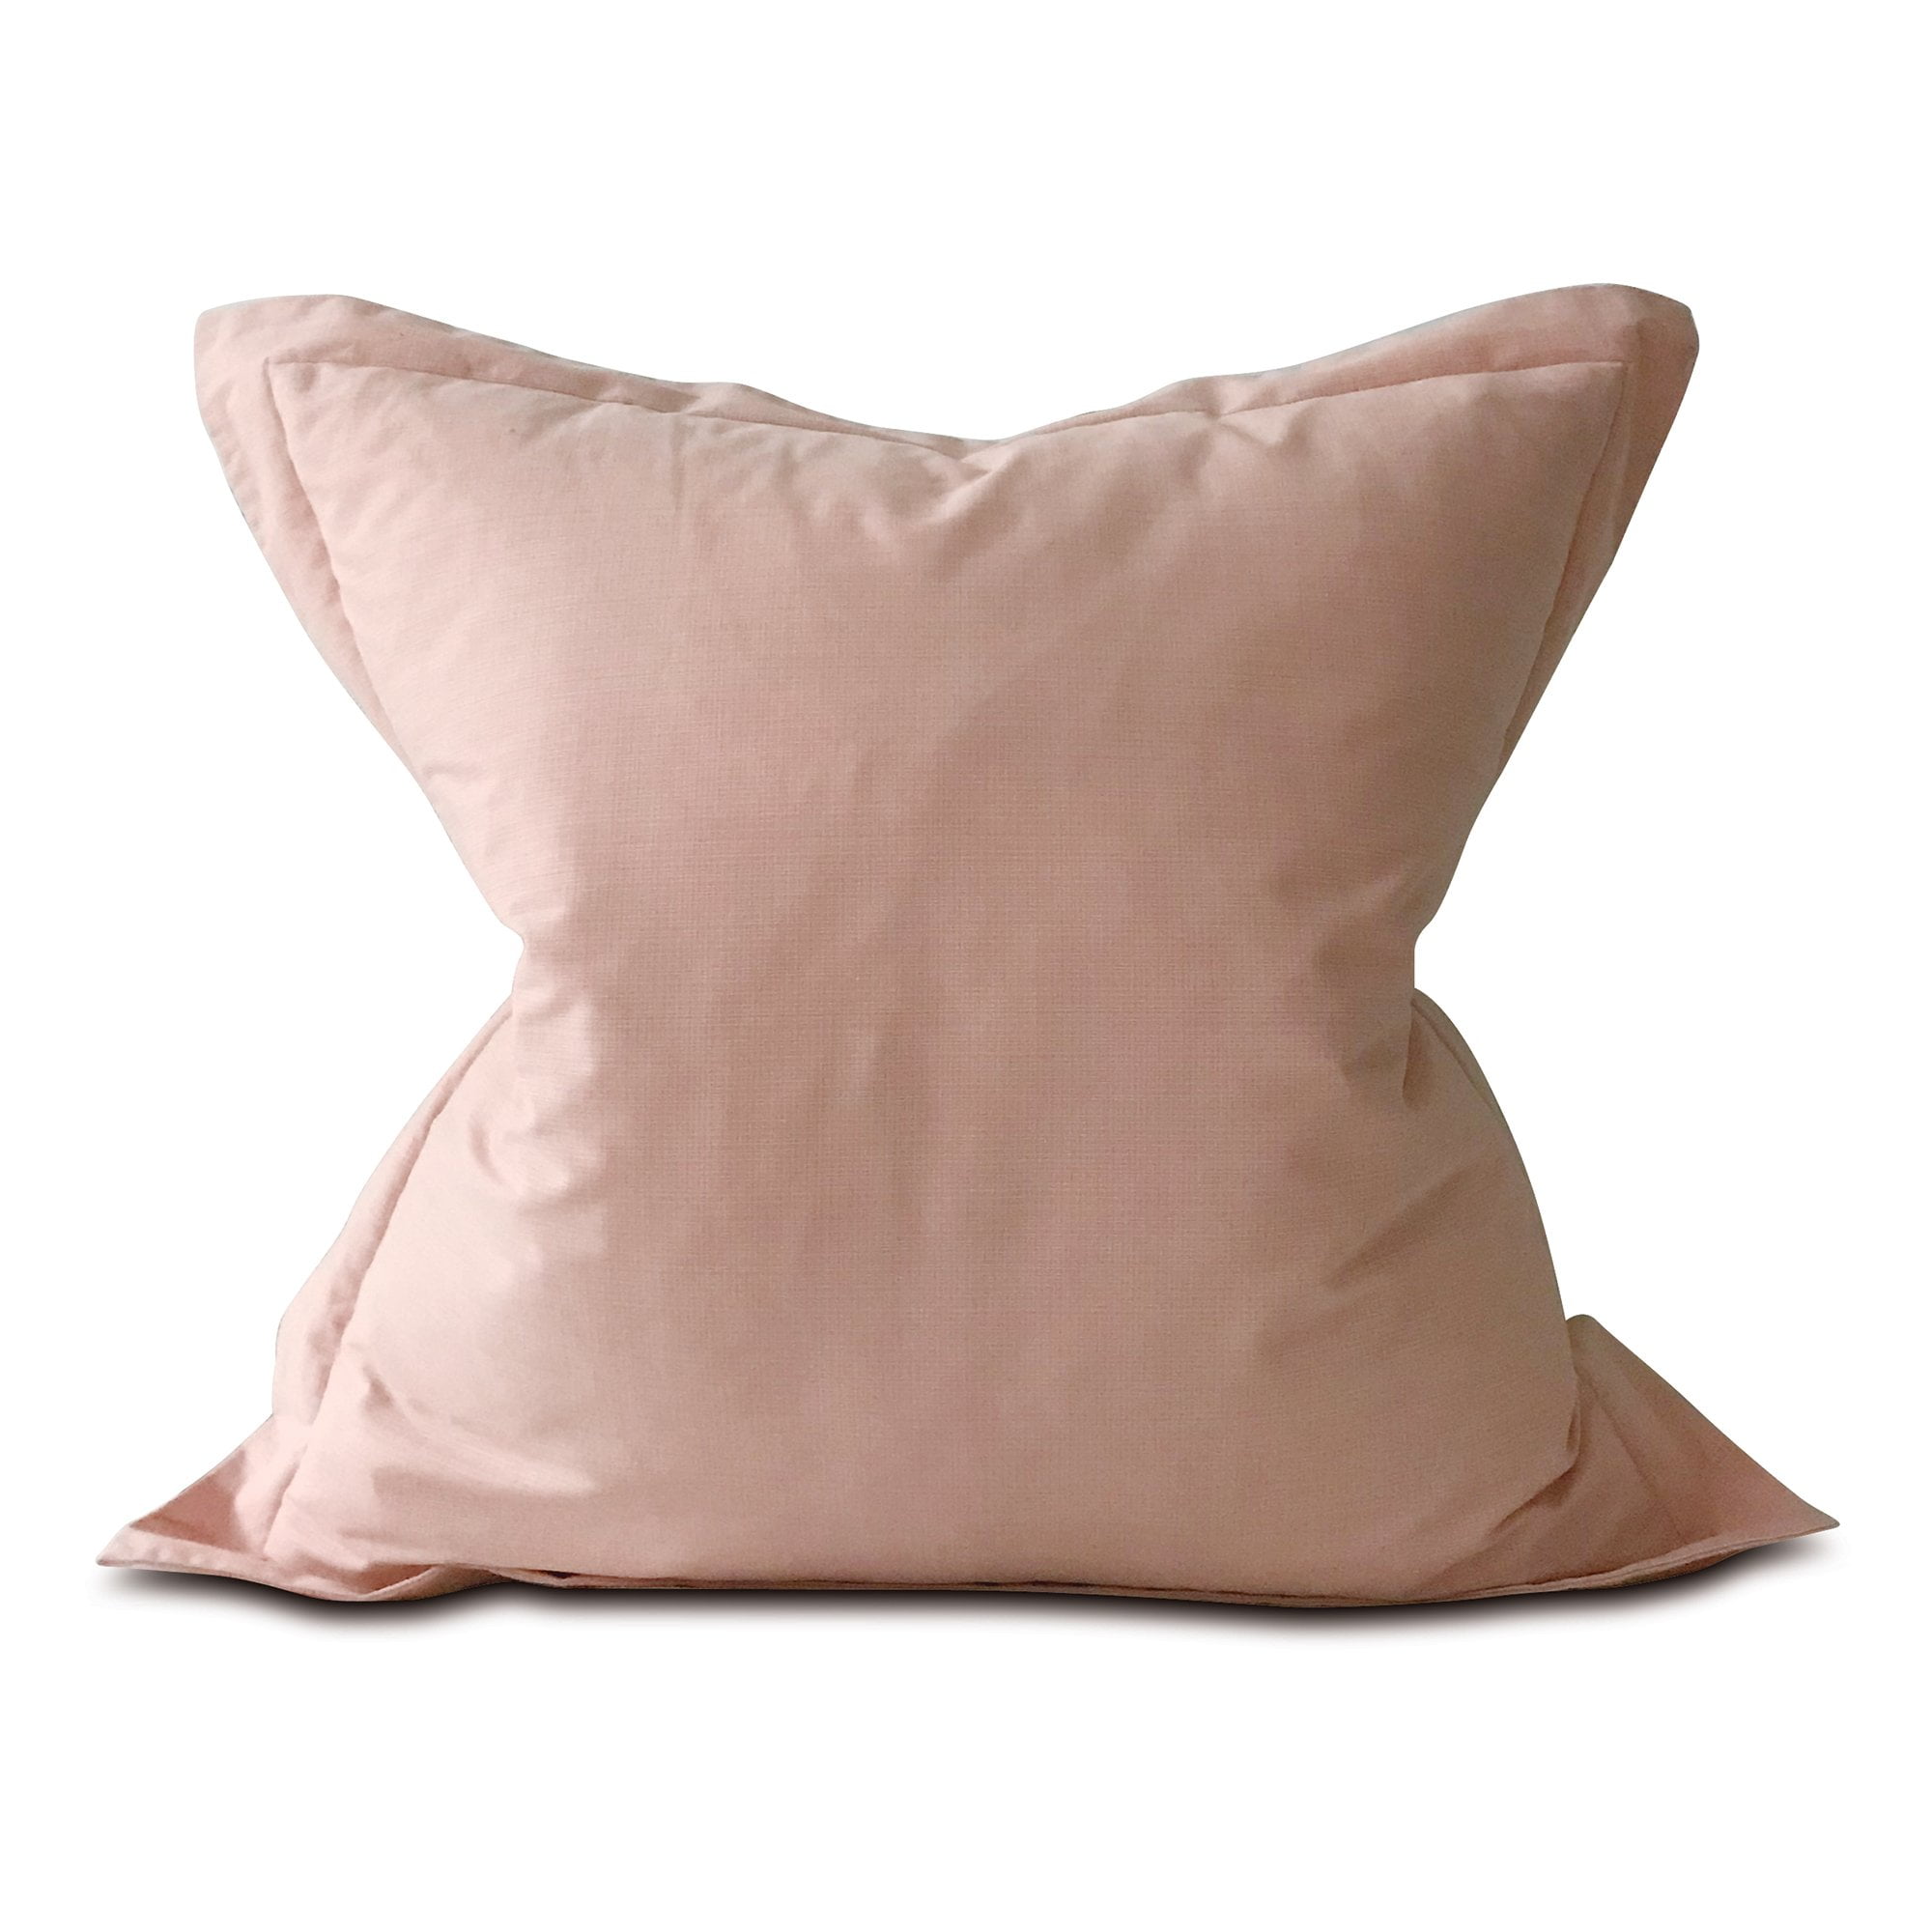 Details about   KENNETH COLE REACTION HOME BLISS 1 EURO PILLOW SHAMS  BLUSH 